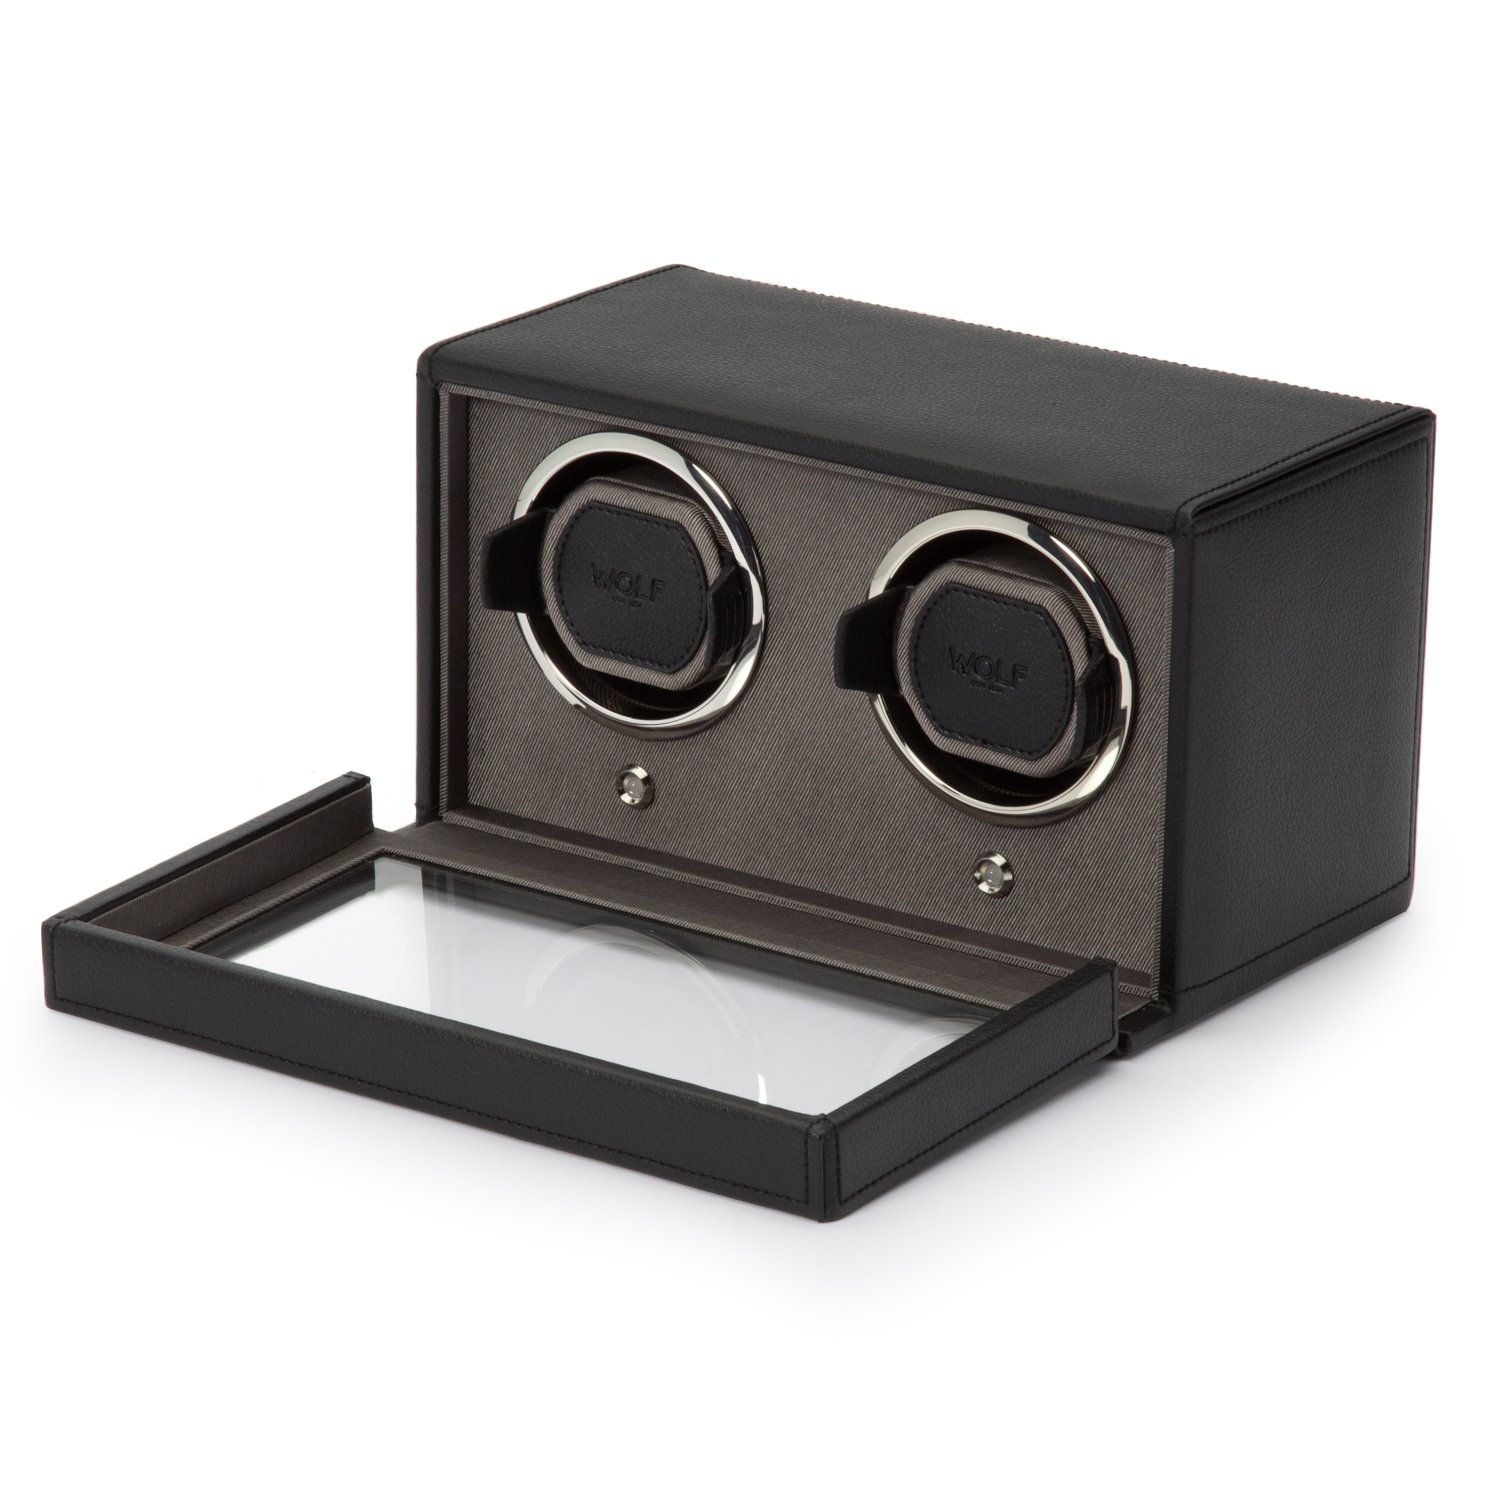 WOLF Unisex 461203 Wolf Cub Double Black Analog Display Watch Winder with Cover, 6x5x5.75